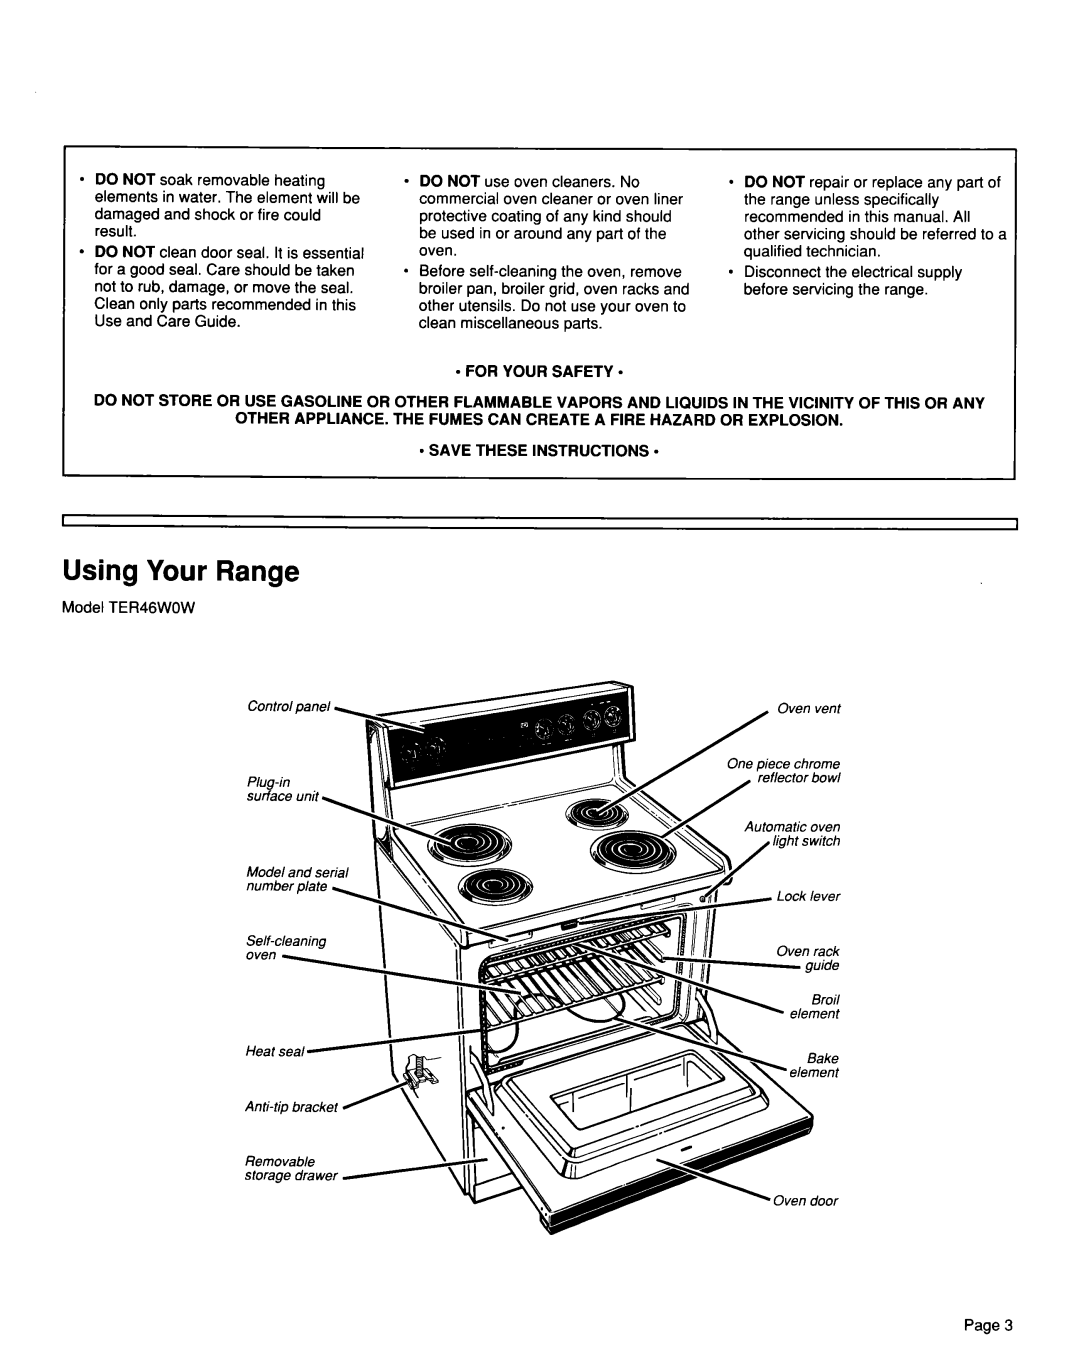 Whirlpool TER46WOW installation instructions Using Your Range 